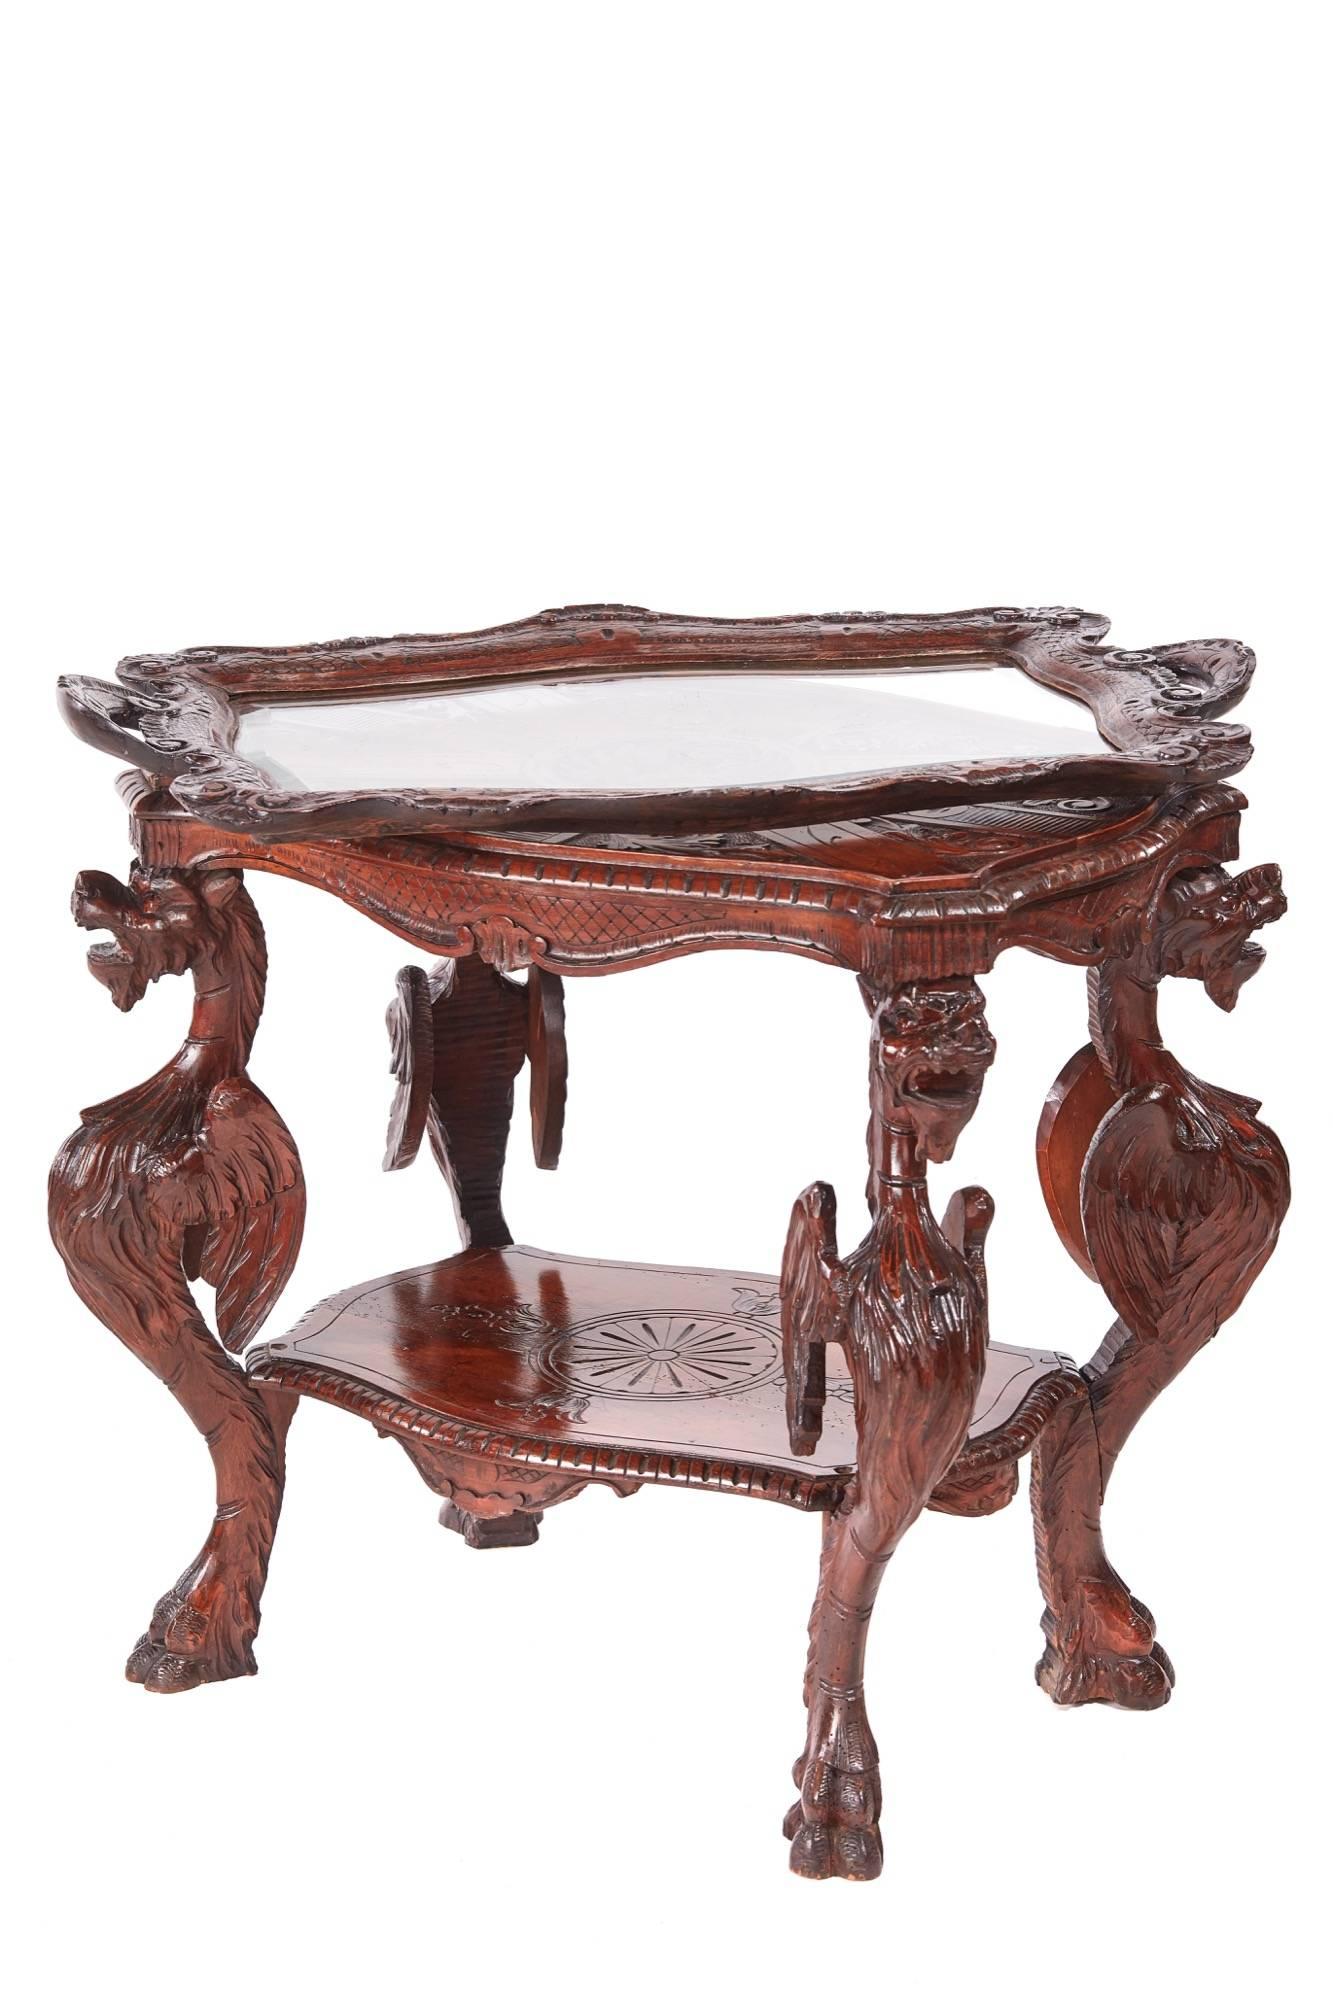 Unusual antique carved oak Italian centre table, having a serpentine carved top with lion decoration, fitted with a removable tray with a glass top, the upper tier raised on four lovely carved caryatid dragon legs on paw feet united by a carved